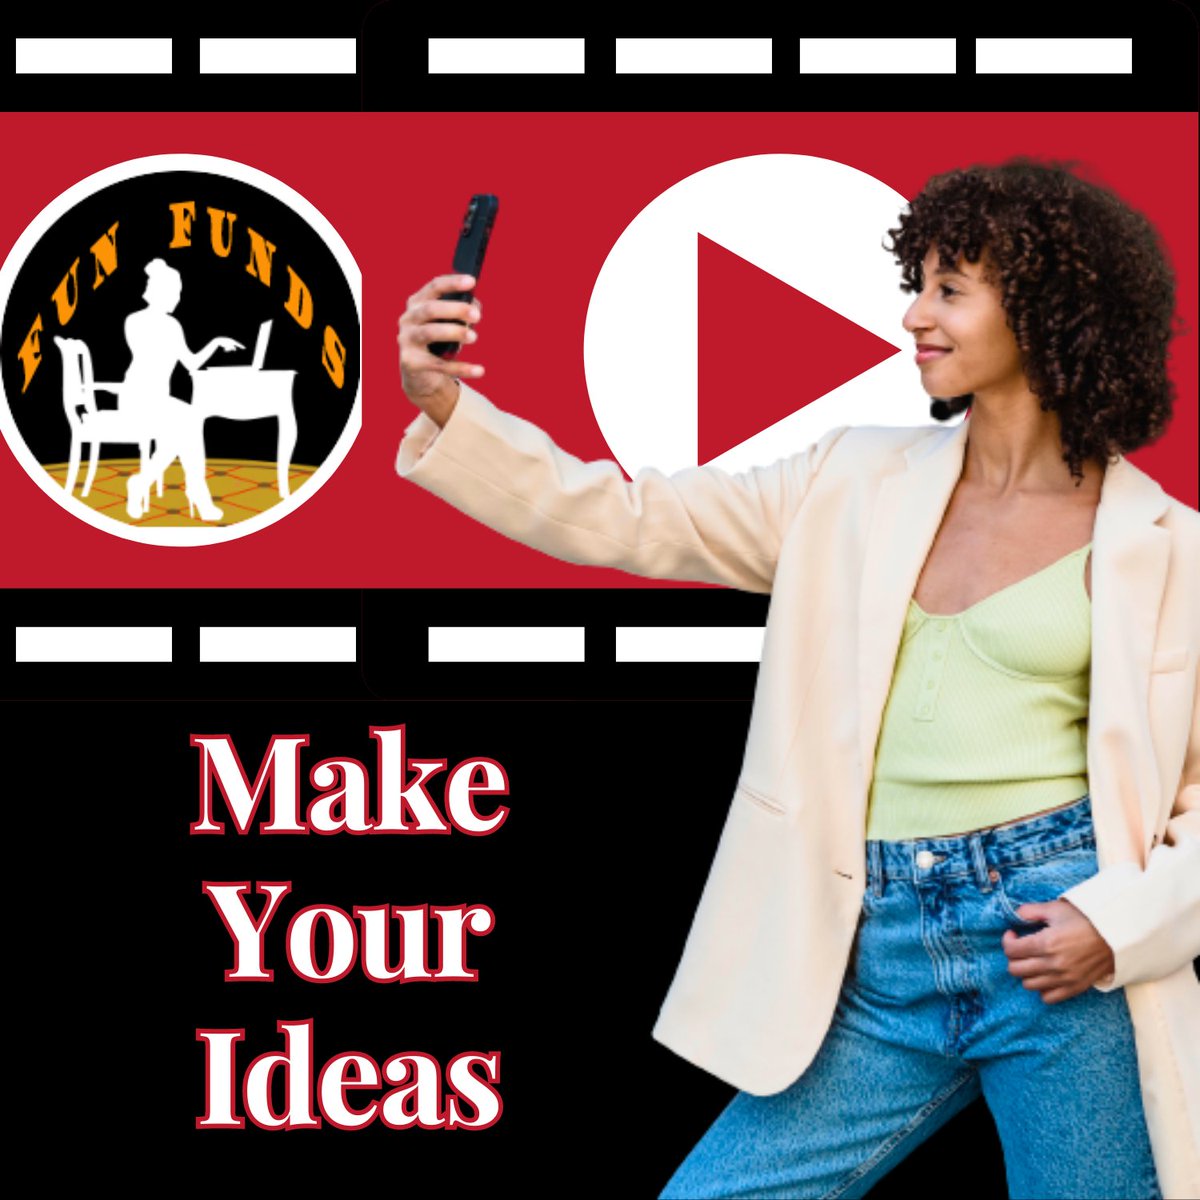 Your ideas are valuable.
Spread it by making videos

mastpaisa.blogspot.com/p/how-to-earn-…

#mastpaisa #funfunds
#ideas #idea #videos #video #makingvideos #makingvideo #makevideos #makevideo
#youtube #youtubevideo #youtubechannel #Valuable #beneficial #makeideas #spreadideas